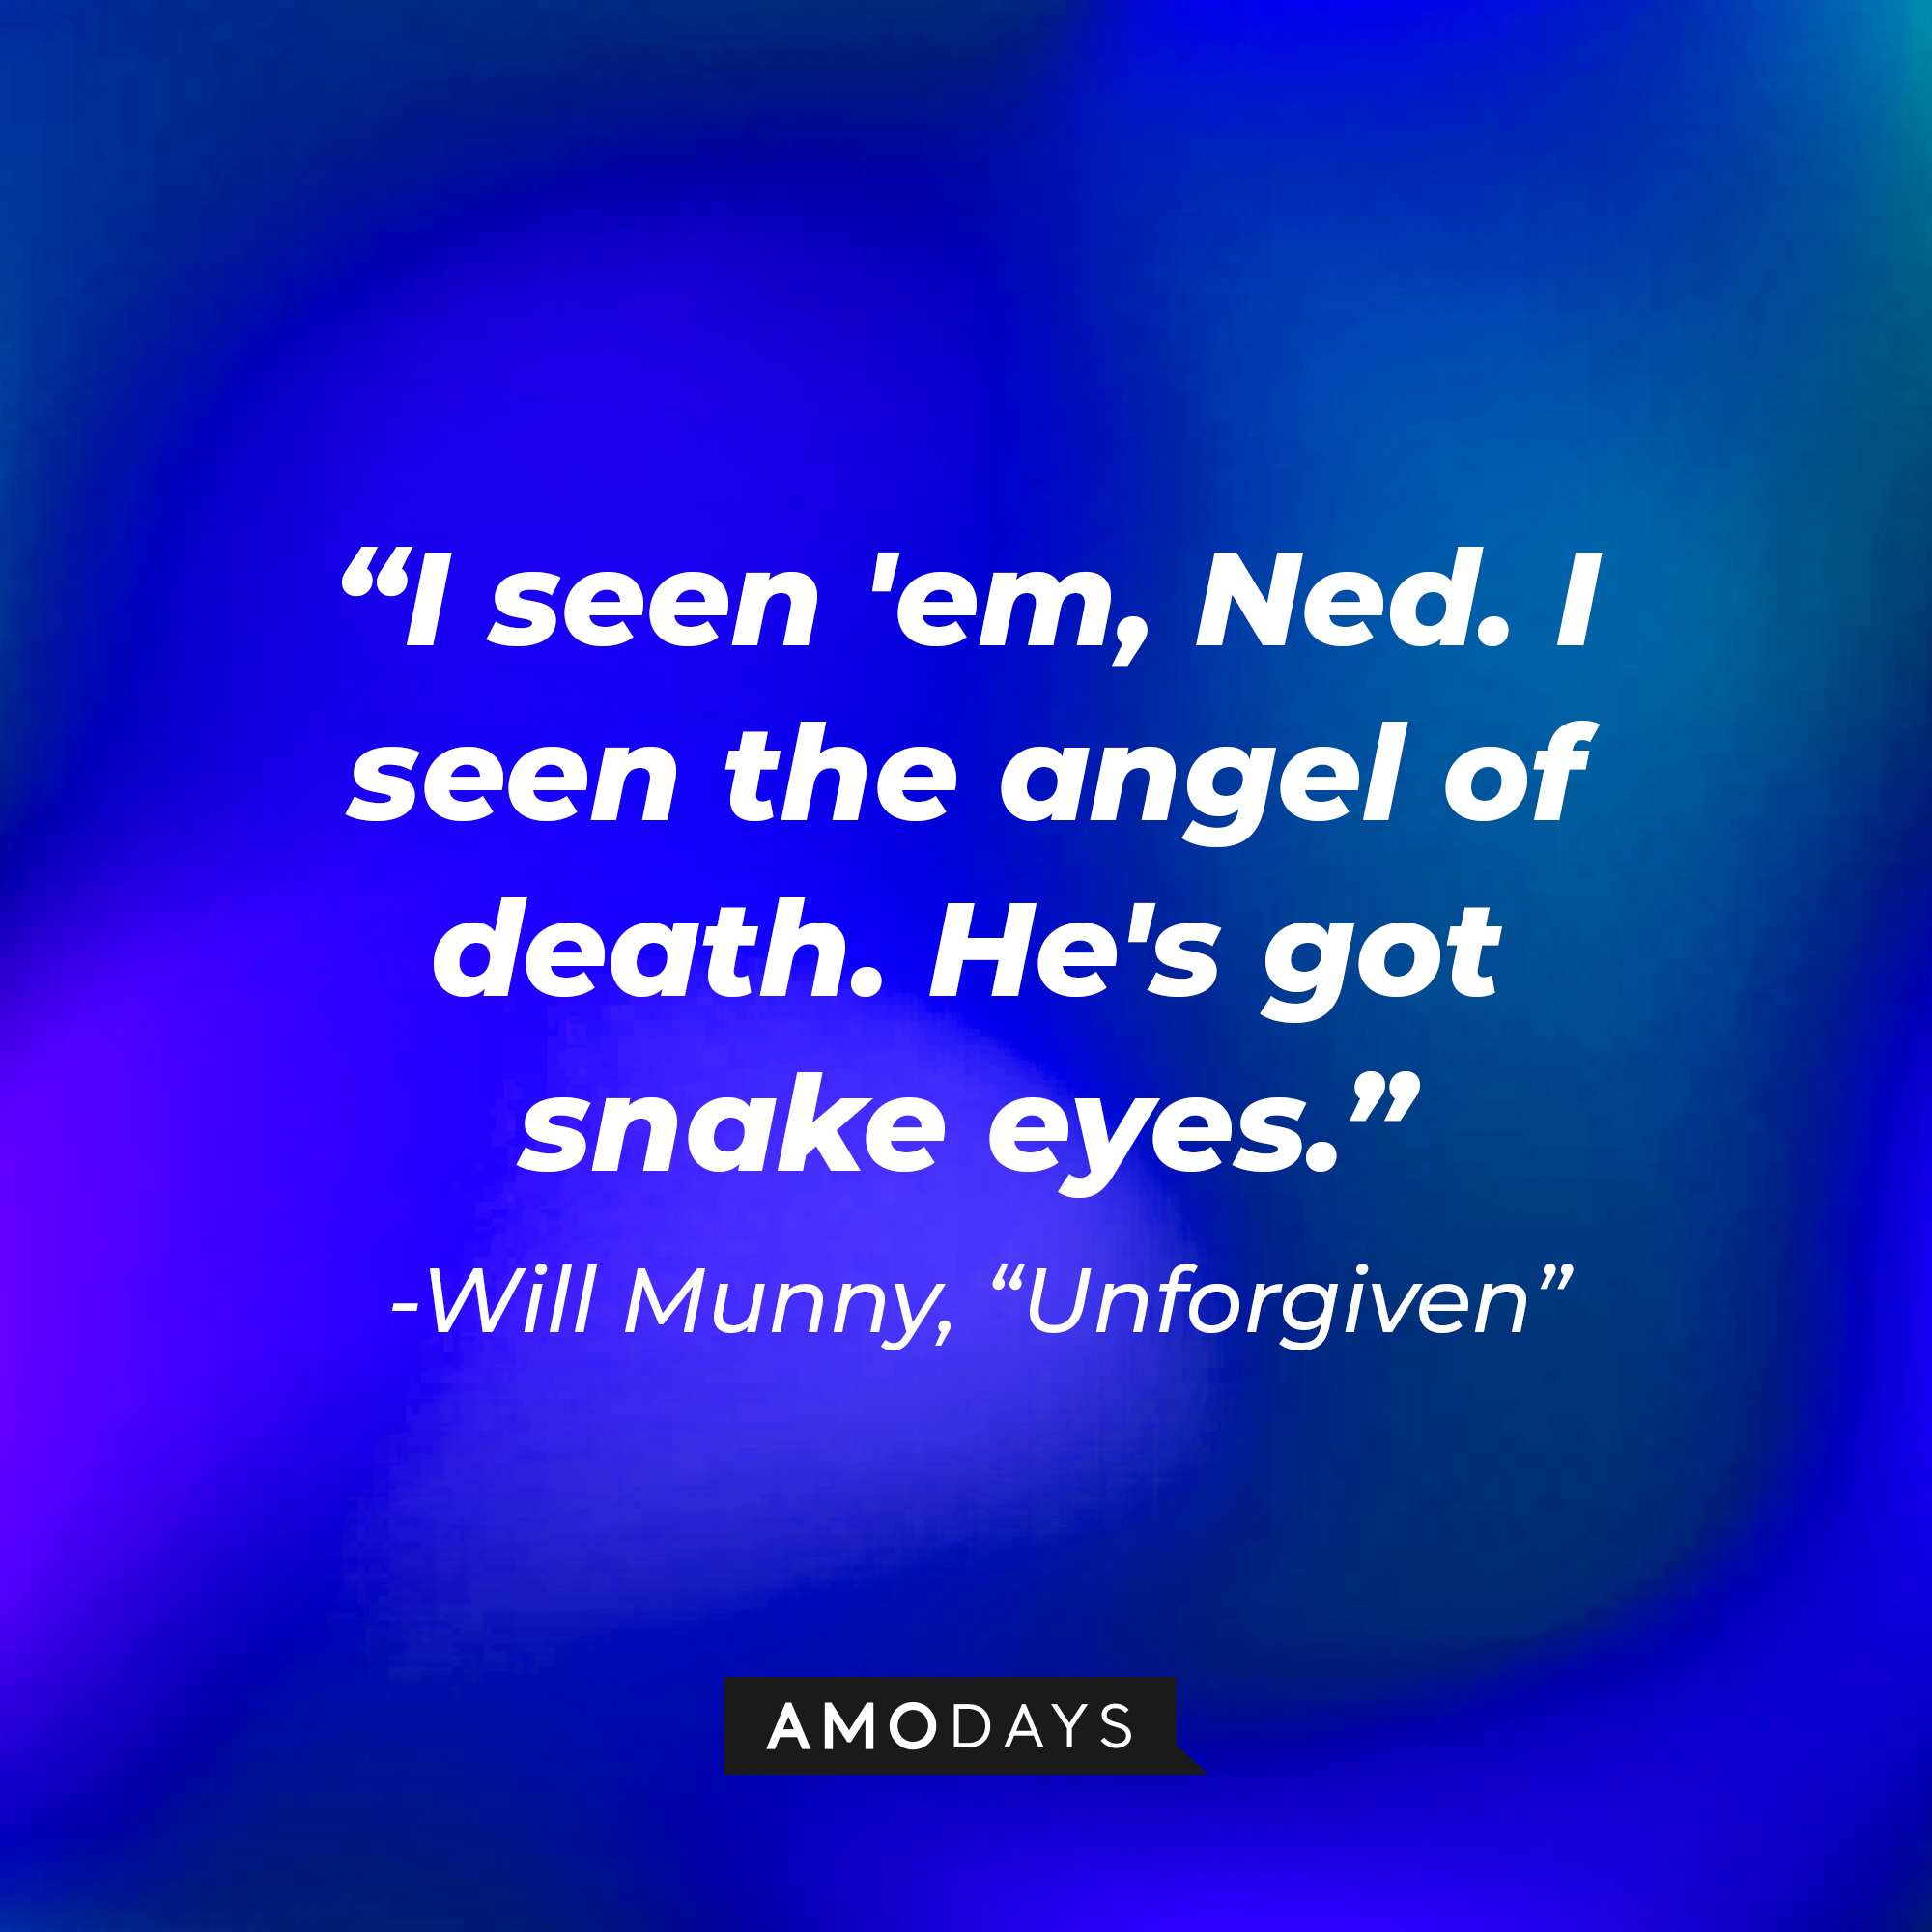 William Munny's quote in "Unforgiven:" "I seen 'em, Ned. I seen the angel of death. He's got snake eyes."   | Source: AmoDays